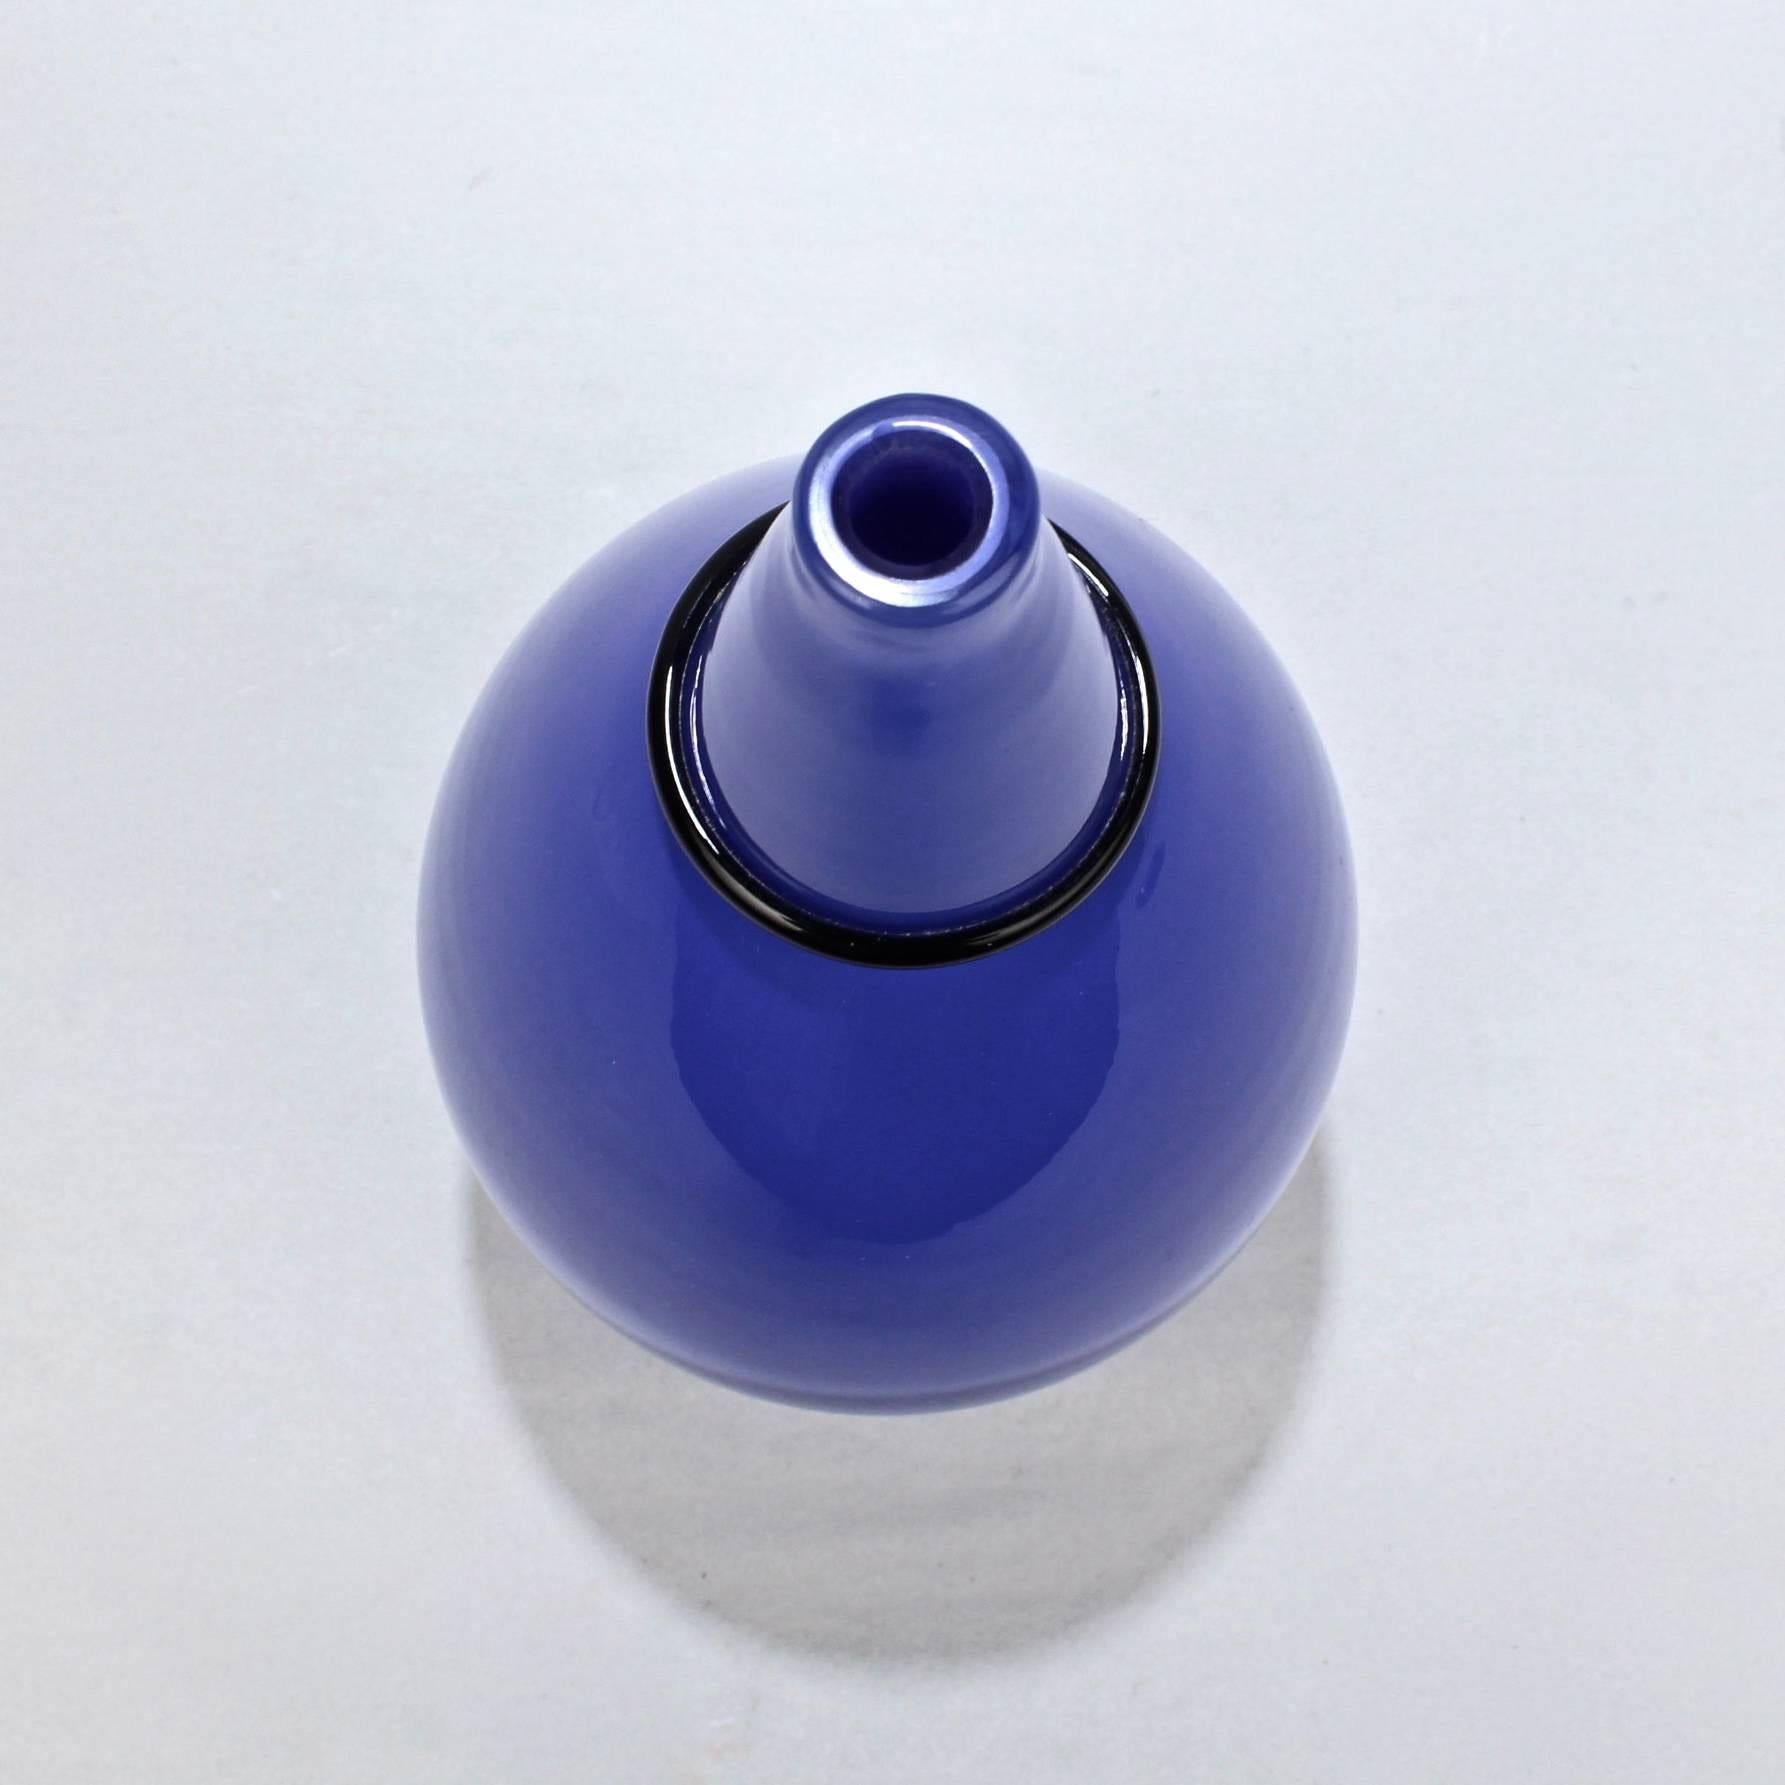 Blue Murano Glass Vase by Tagliapietra & Angelin for Effetre International, 1985 In Good Condition For Sale In Philadelphia, PA